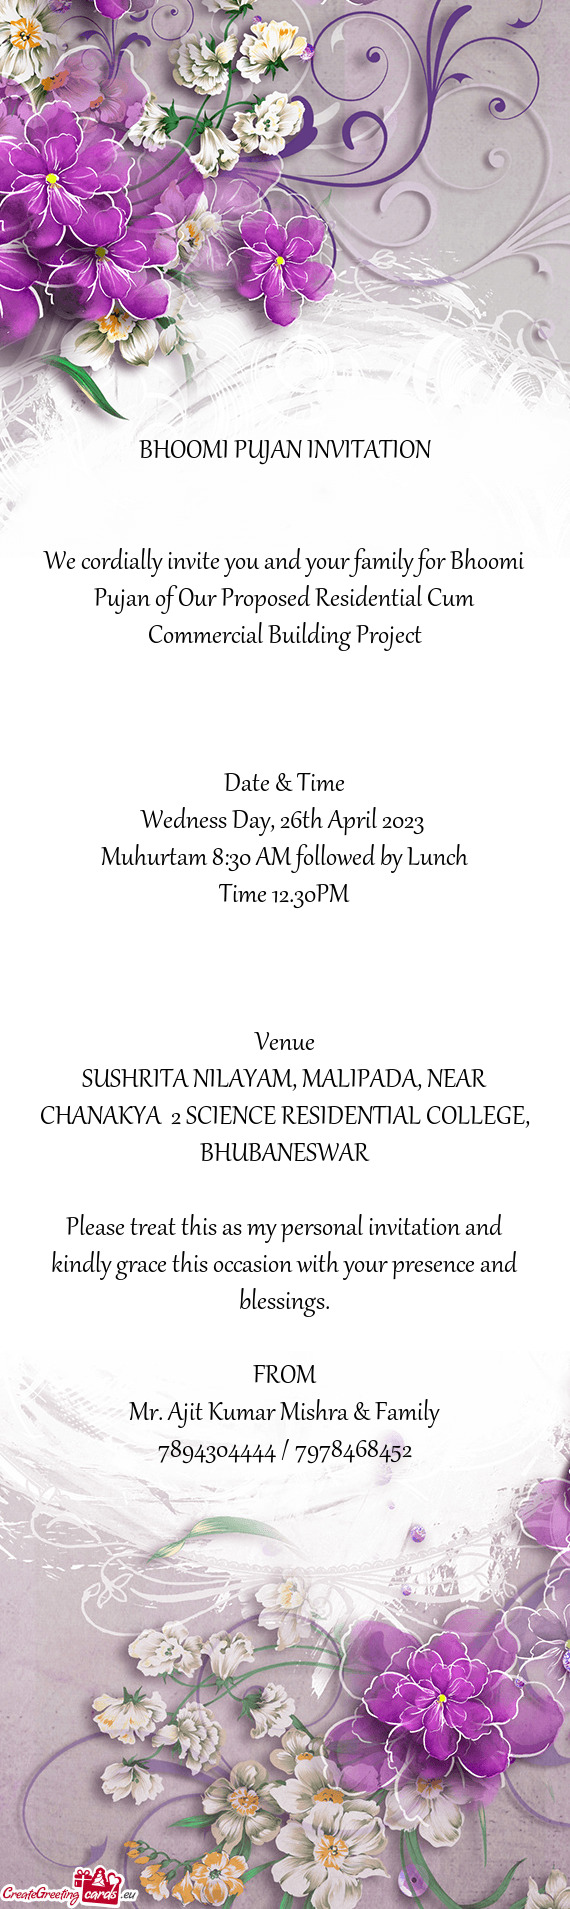 We cordially invite you and your family for Bhoomi Pujan of Our Proposed Residential Cum Commercial